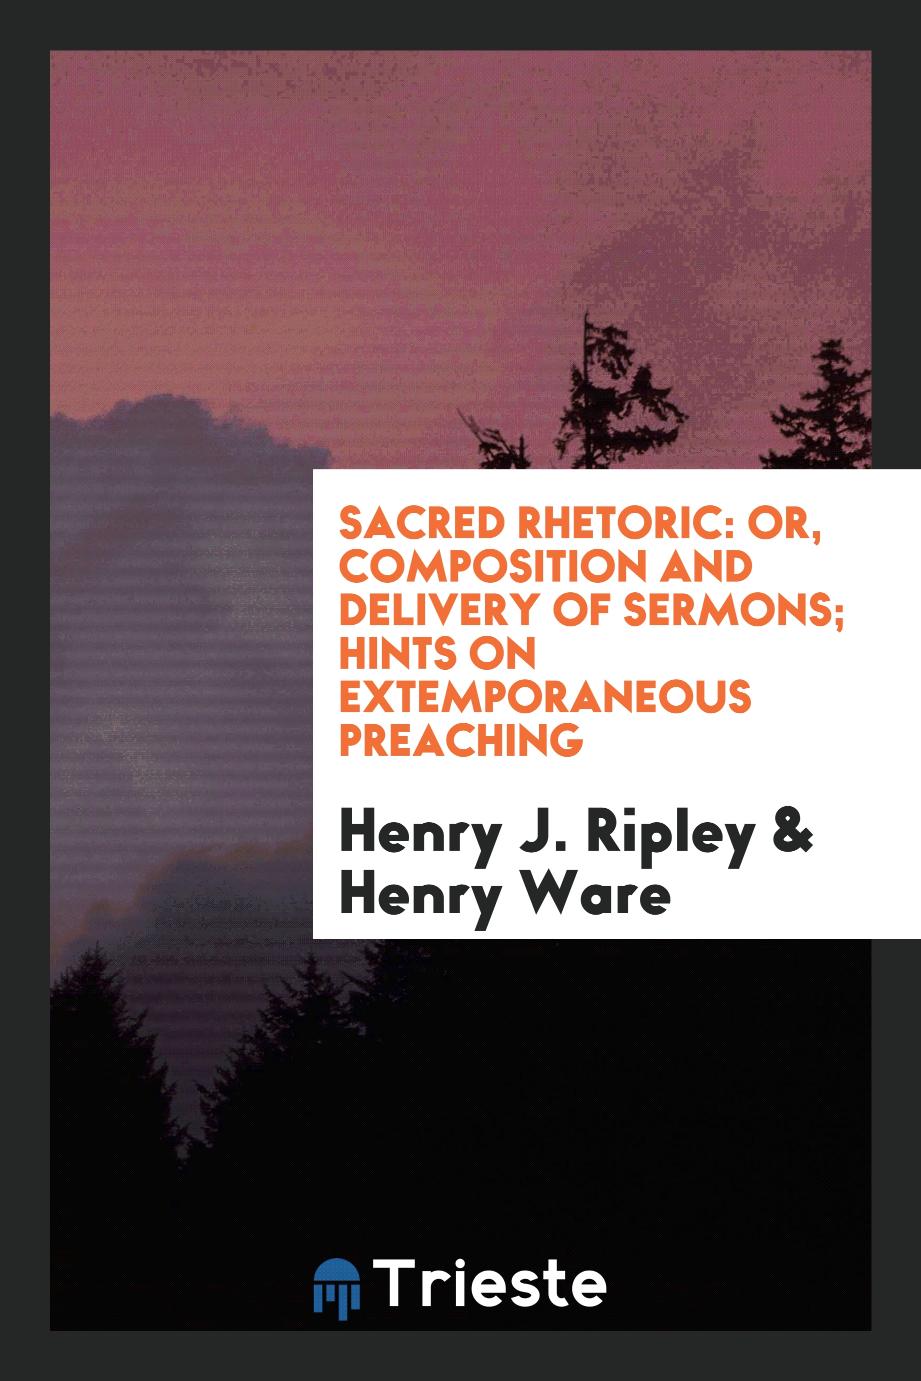 Sacred rhetoric: or, Composition and delivery of sermons; Hints on extemporaneous preaching